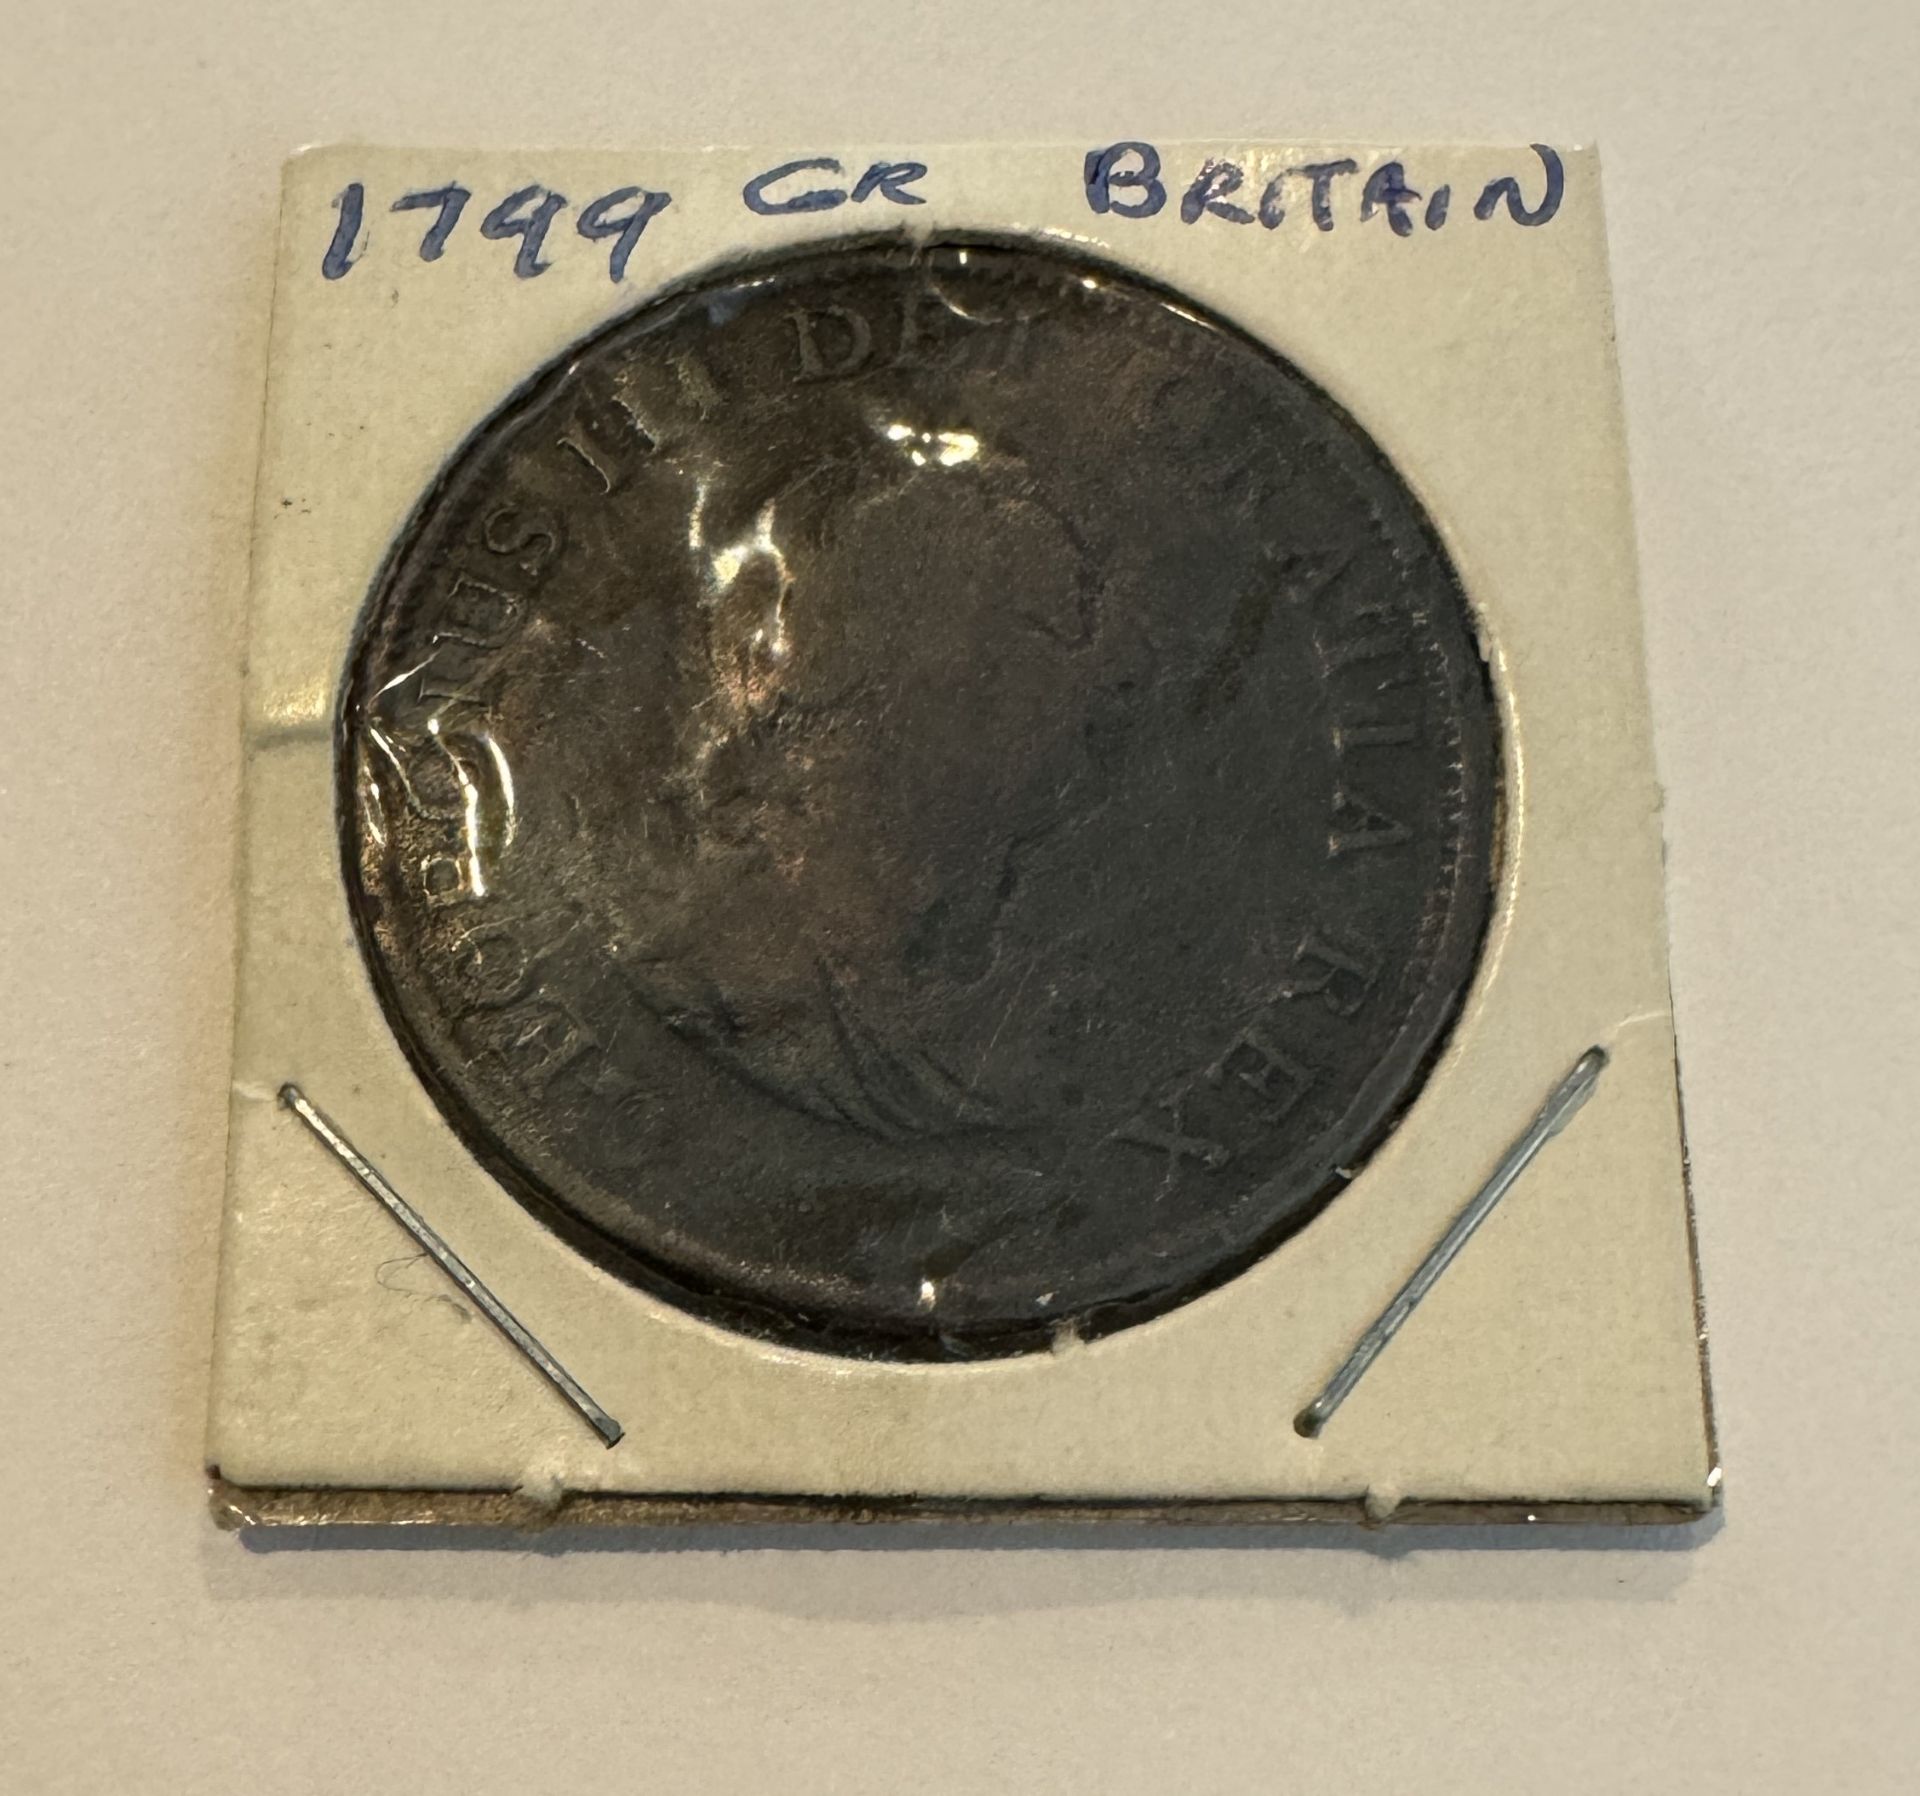 1799 GREAT BRITAIN 1/2 HALF PENNY - Image 2 of 2